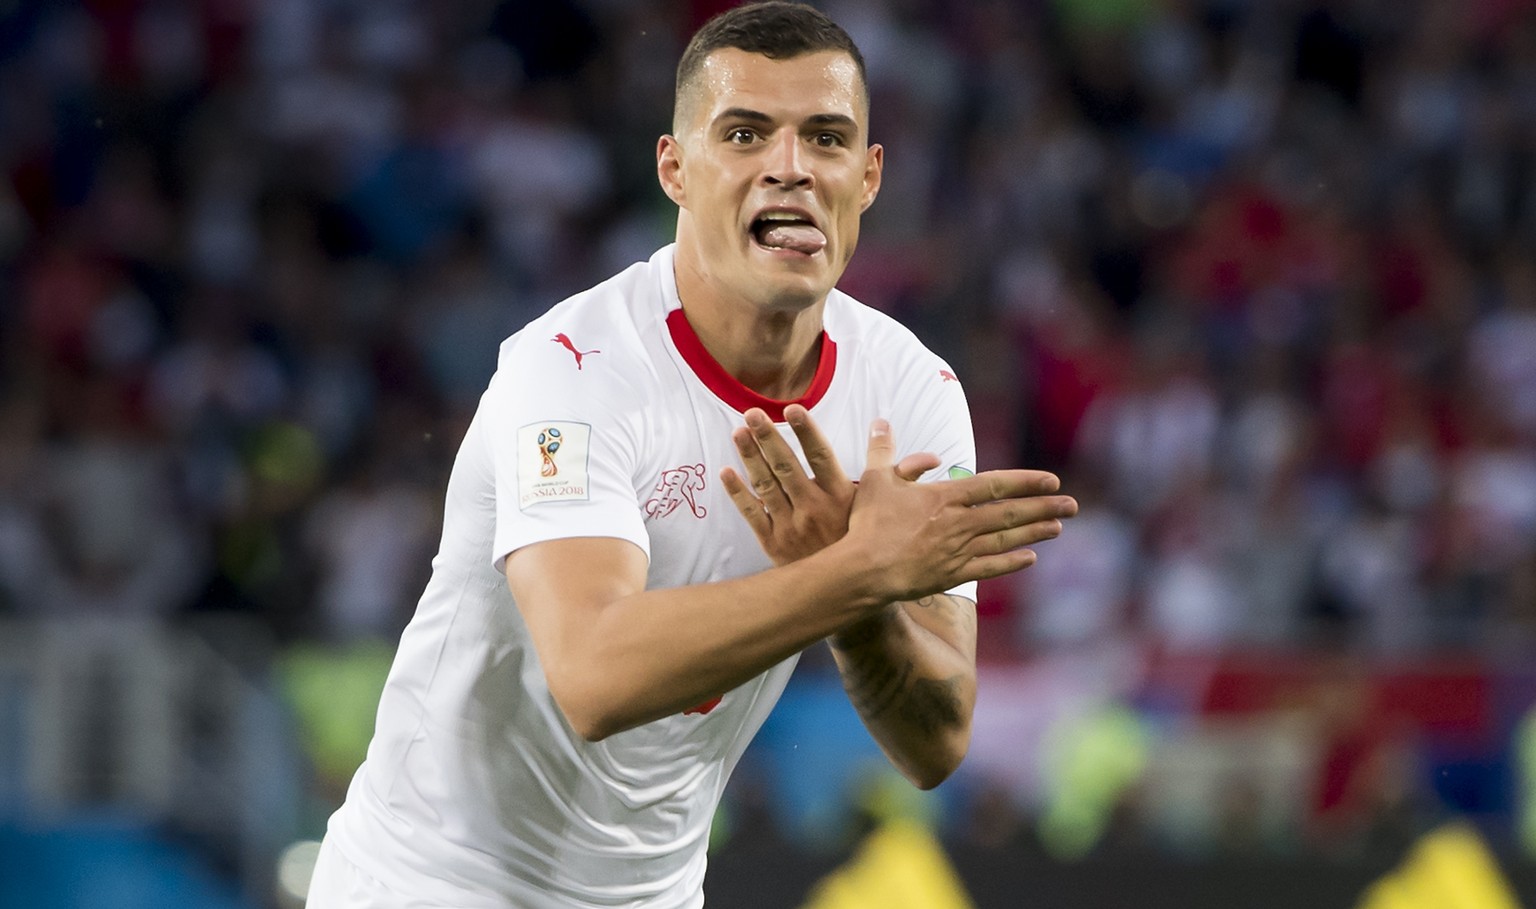 Switzerland's midfielder Granit Xhaka, celebrates after scoring a goal during the FIFA World Cup 2018 group E preliminary round soccer match between Switzerland and Serbia at the Arena Baltika Stadium ...